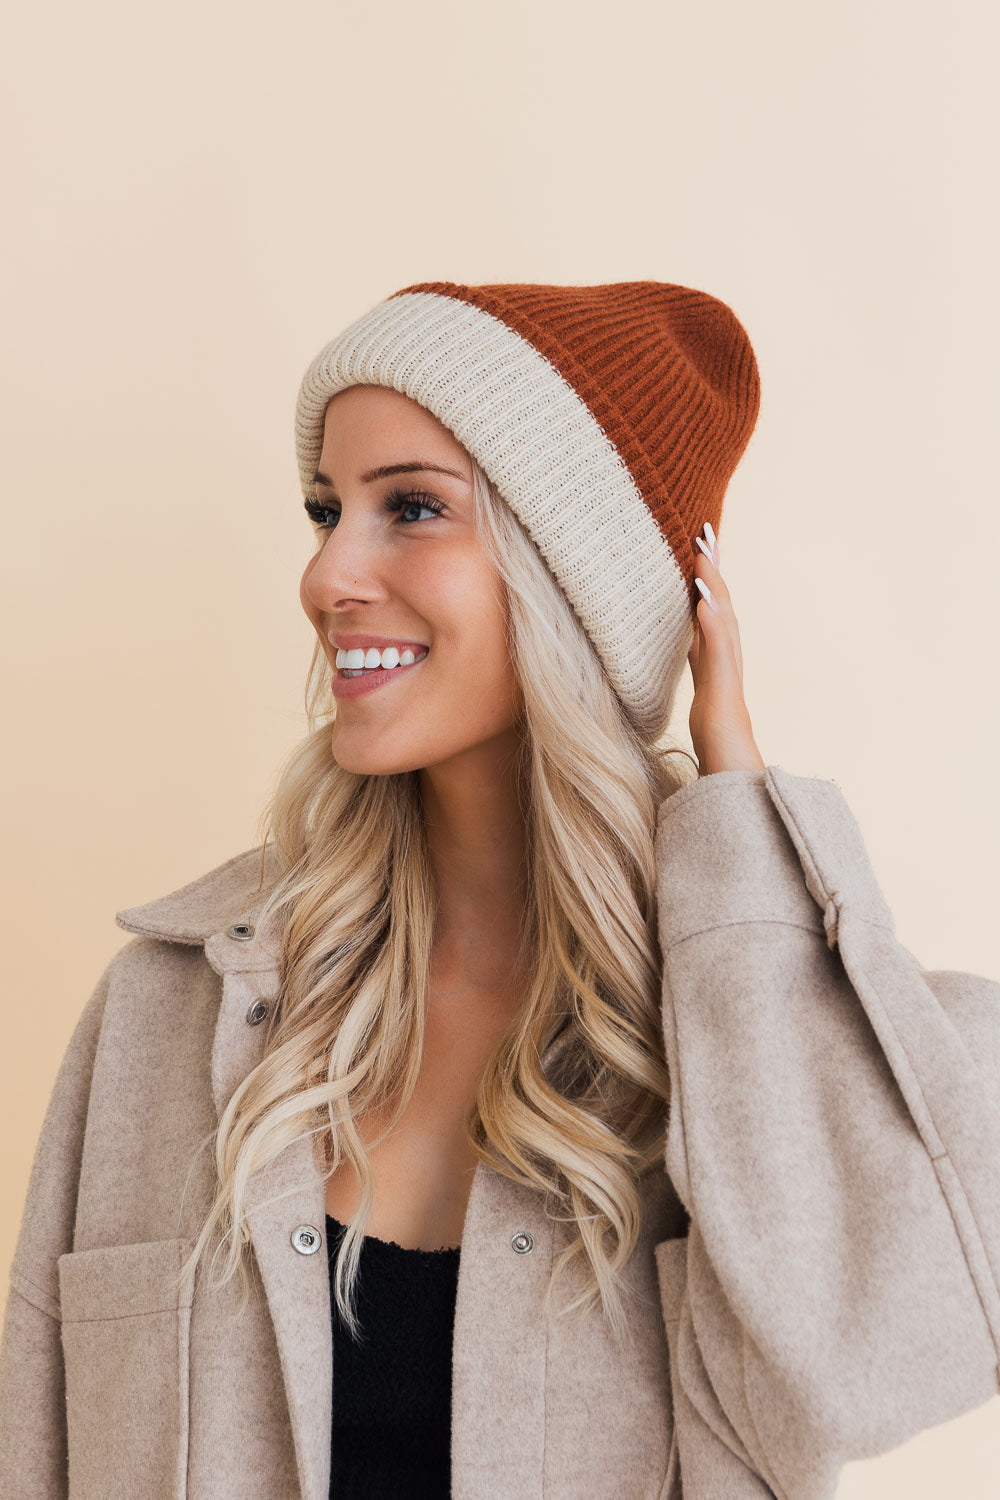 The Two-Tone Knit Beanie – Eastern Apparel